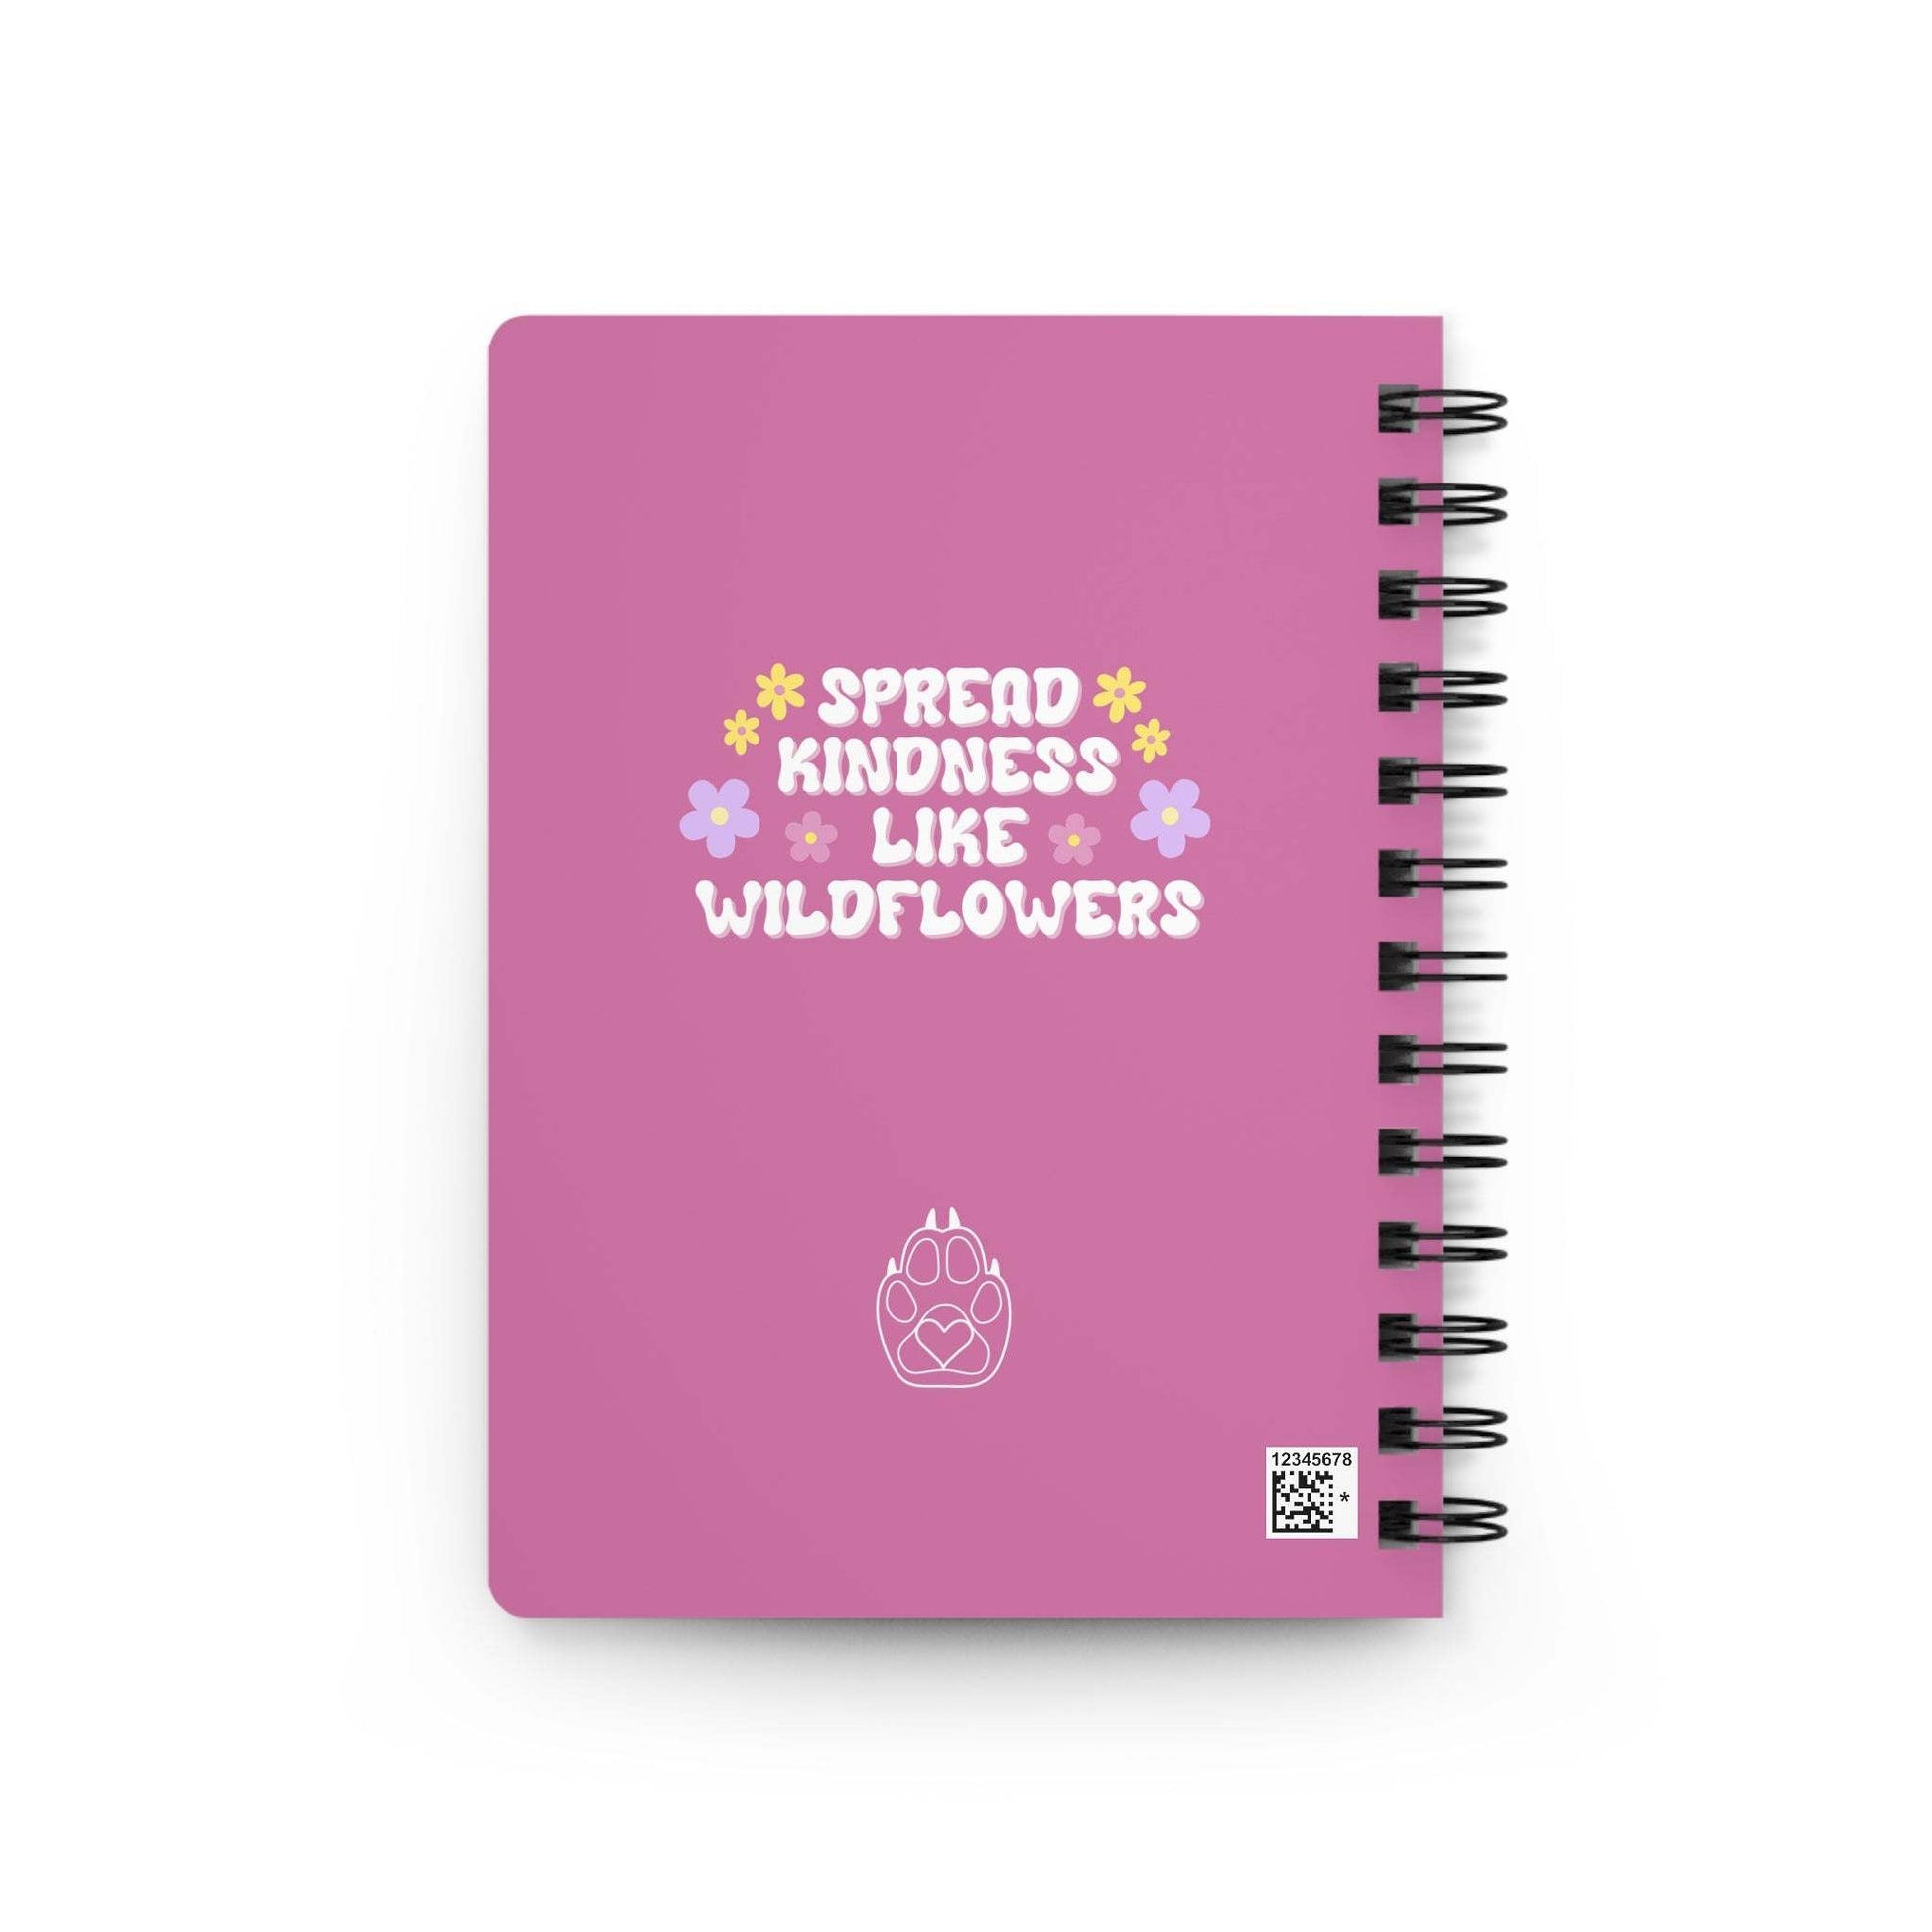 Flower Homeschool Spiral Bound JournalWolfe Paw DesignsFlower Homeschool Spiral Bound JournalPink - Flower Homeschool lined journal 
Your homeschooler can now write in style with our themed lined journals made for kids just like yours!
Each color has its ownFlower Homeschool Spiral Bound Journal